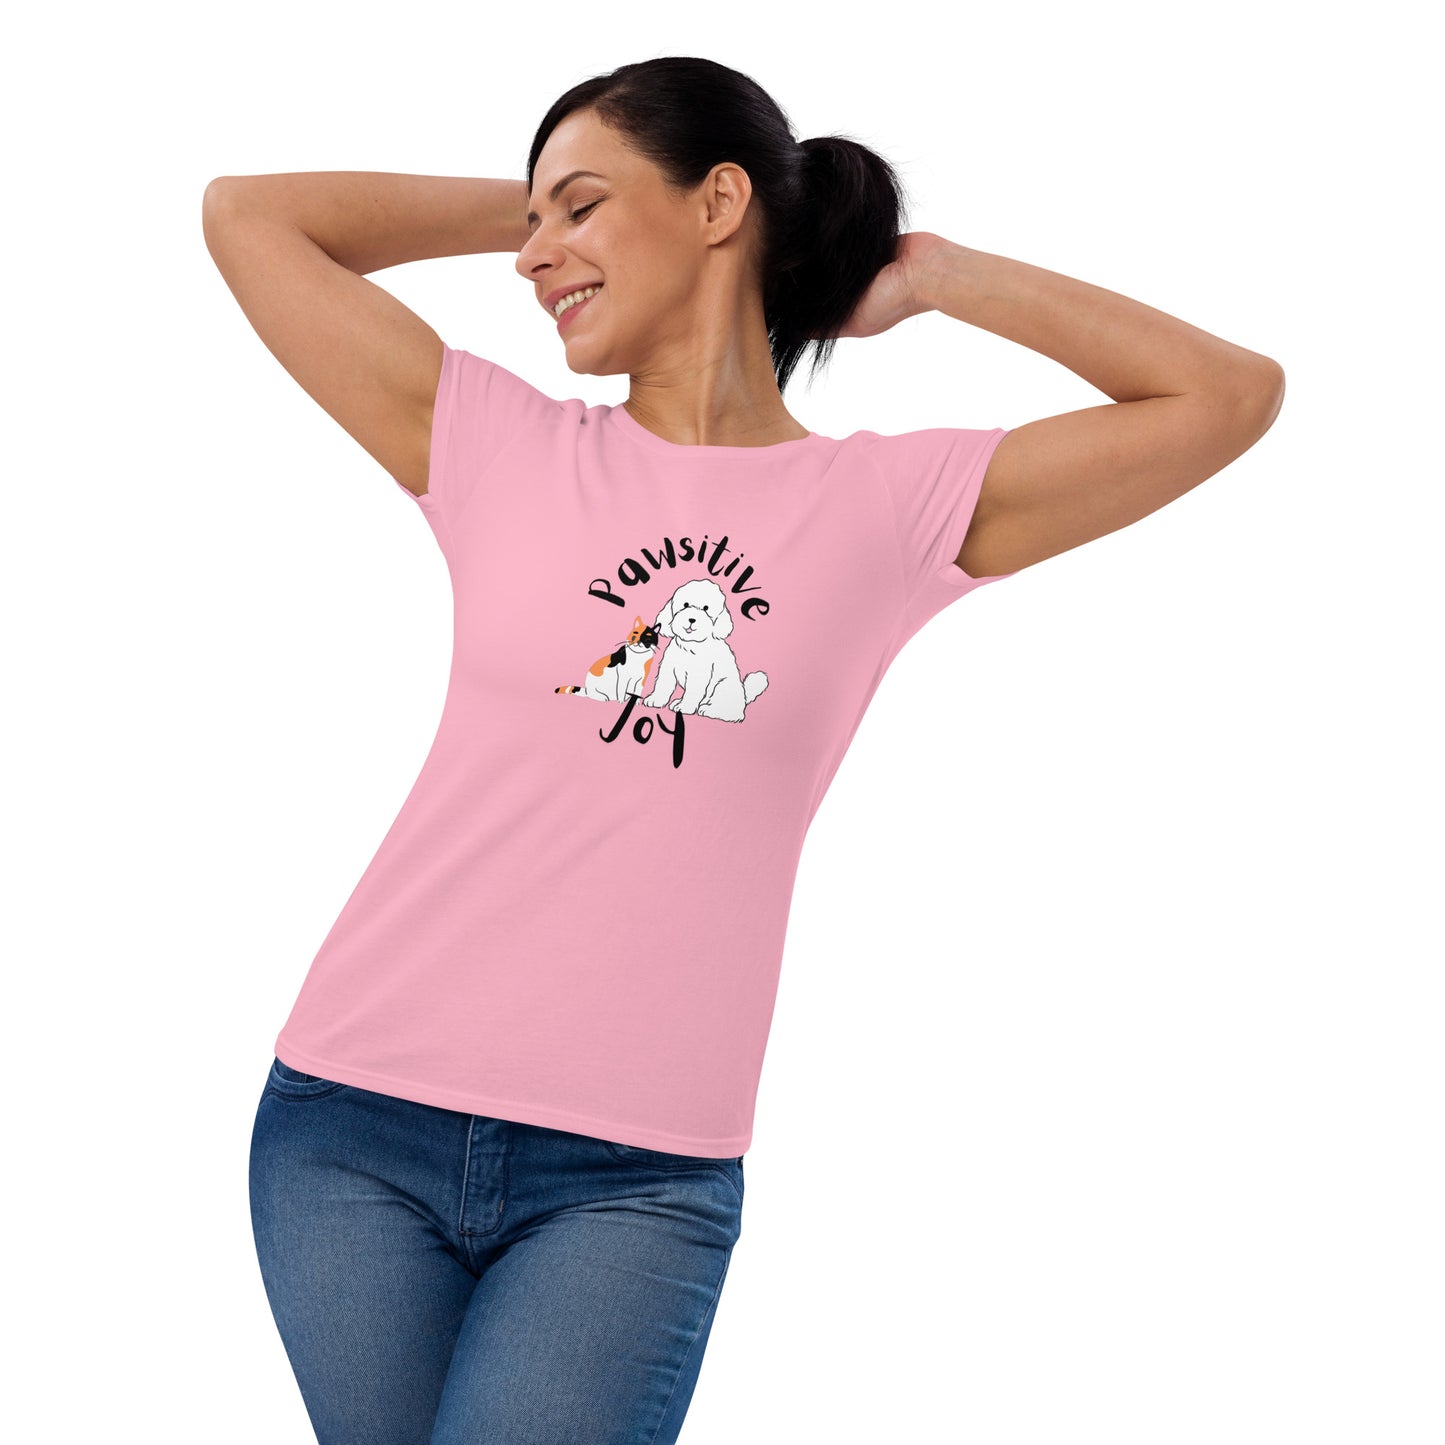 Women's Short Sleeve Fashion Fit T-Shirt: Pawsitive Joy | Comfort, Style, and Compassion Scoop Neck Tee in Red, White, Blue, Pink, and Gray